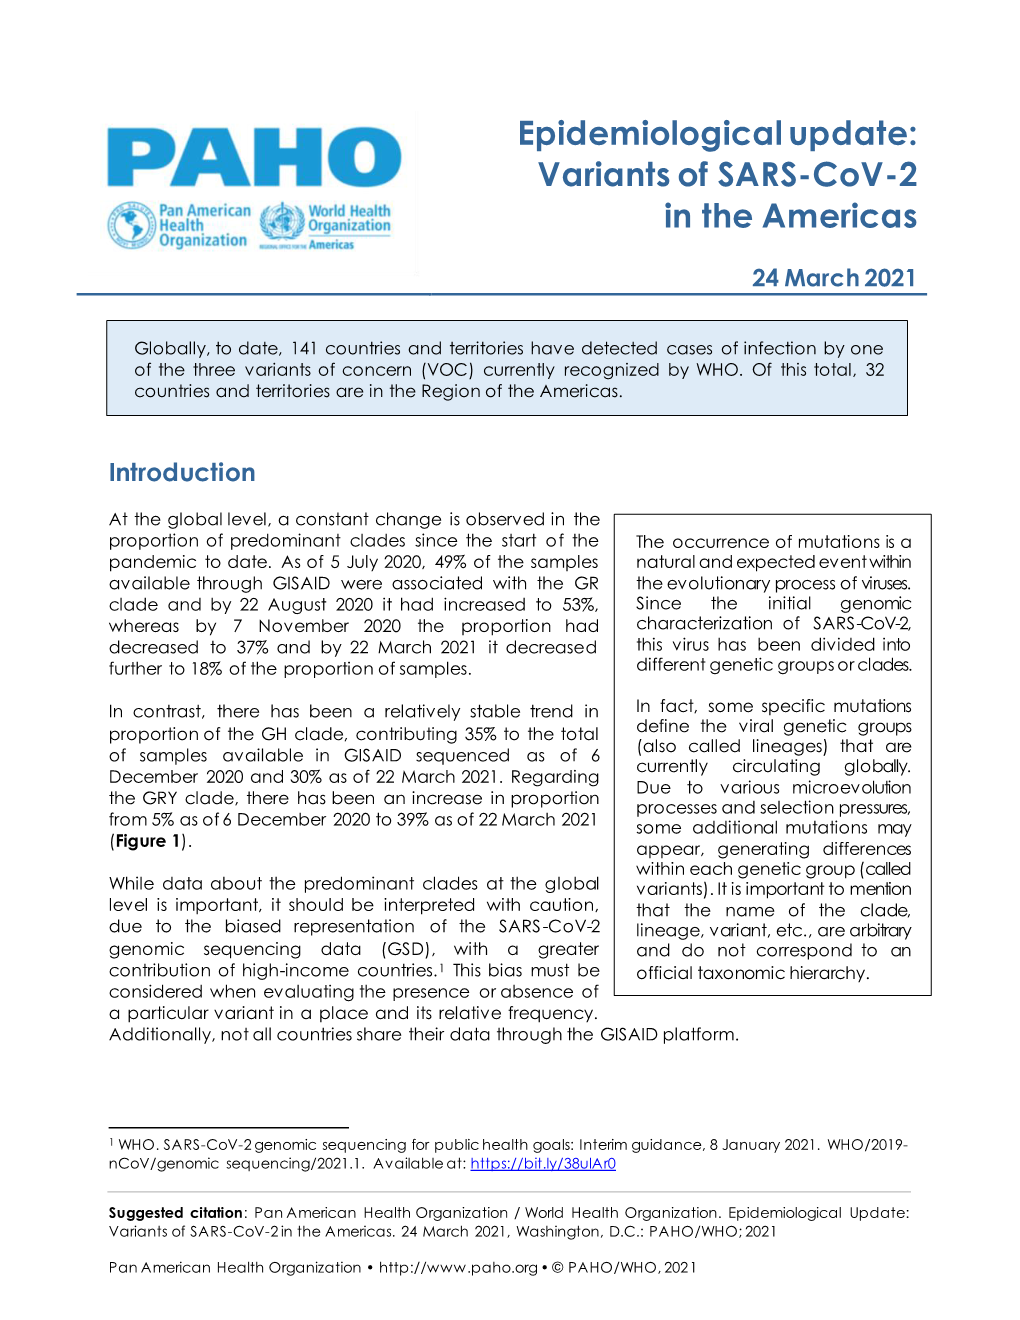 Epidemiological Update: Variants of SARS-Cov-2 in the Americas